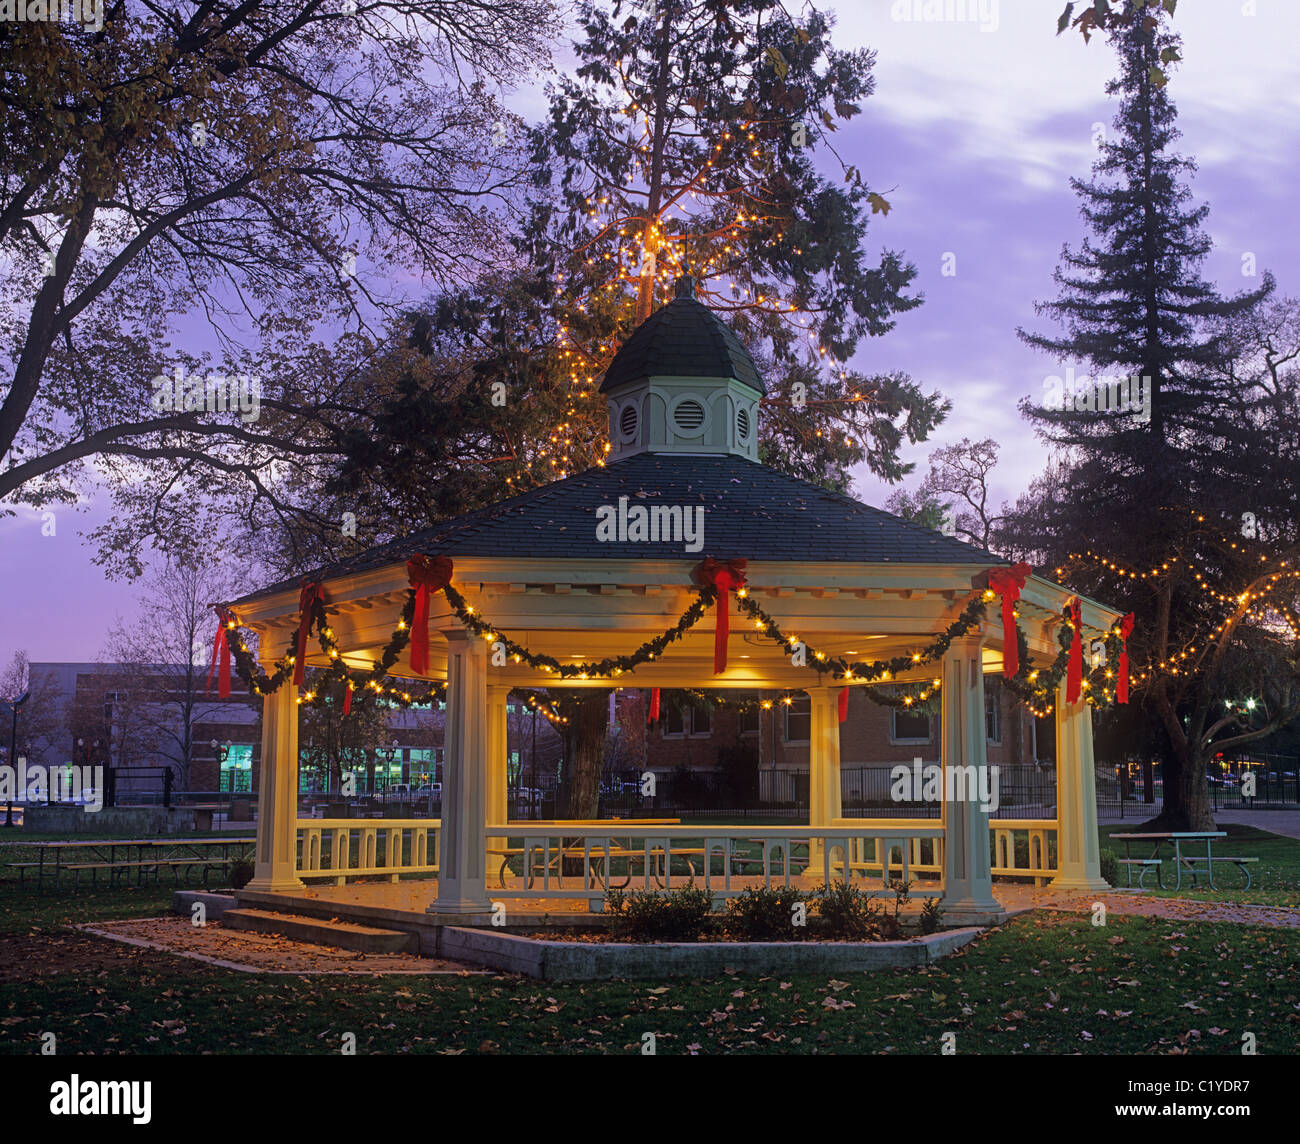 Gazebo in Paso Robles City Park decorated for Christmas. Paso Robles